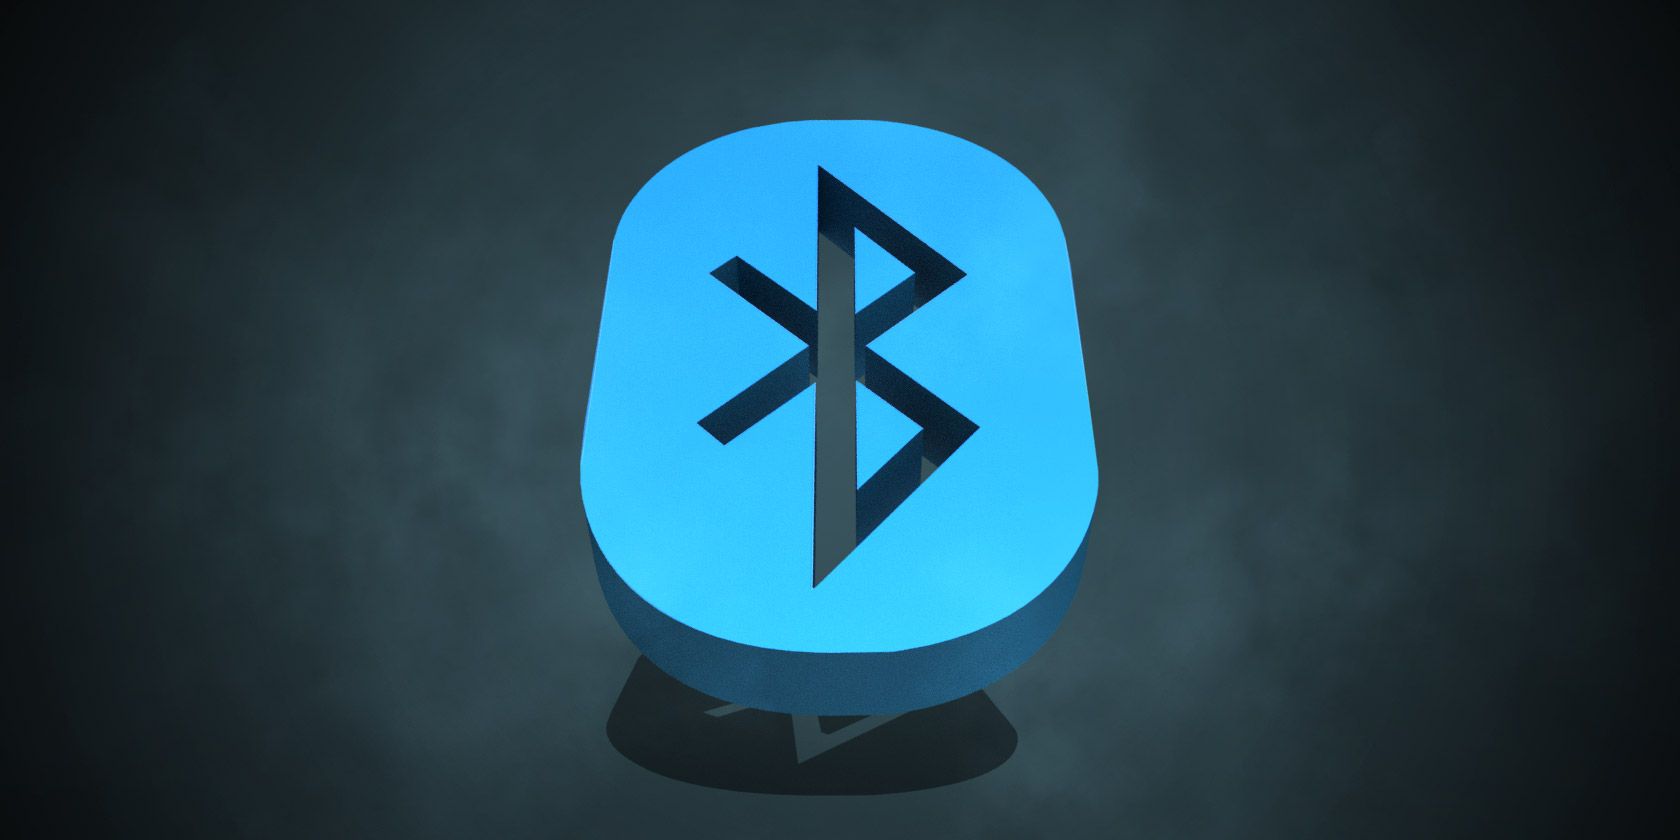 How to Use Bluetooth to Connect Your Phone to a Computer